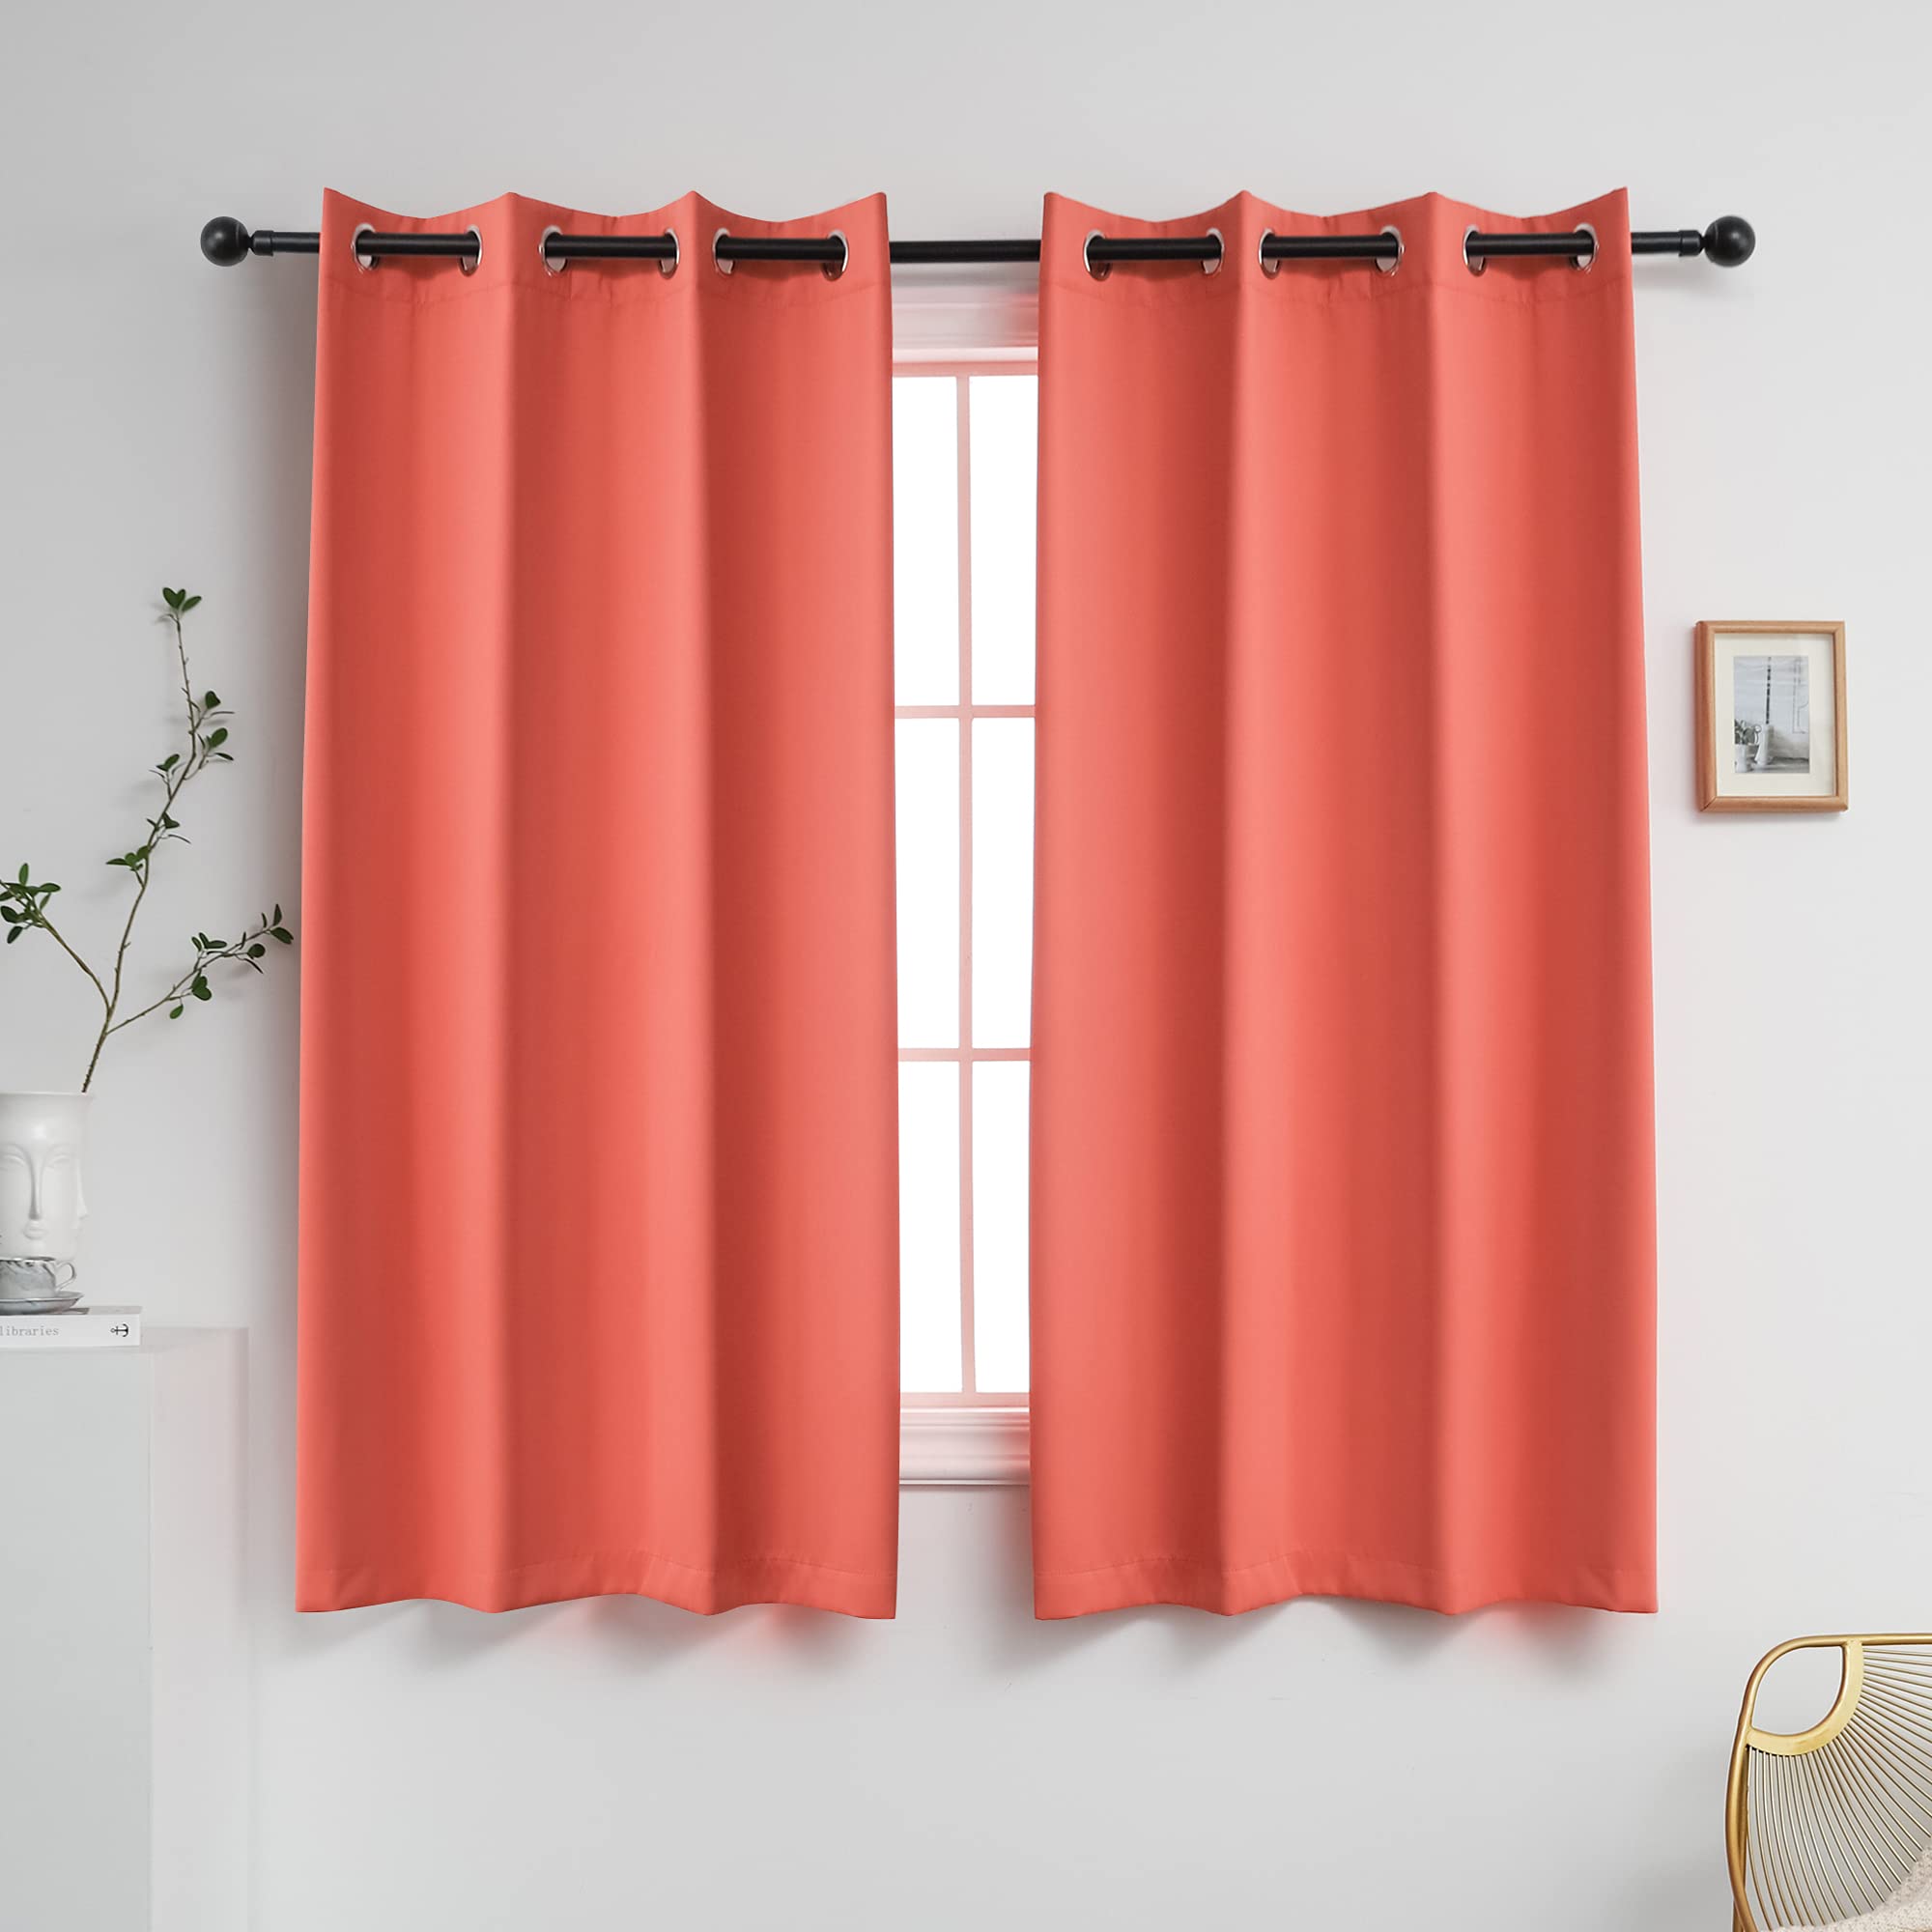 Book Cover YGO Blackout Room Darkening Solid Curtains Grommet Top Thermal Insulated Curtain Panels for Bedroom Living Room 52 inch W x 63 inch L Set of 2 Panels Coral 52